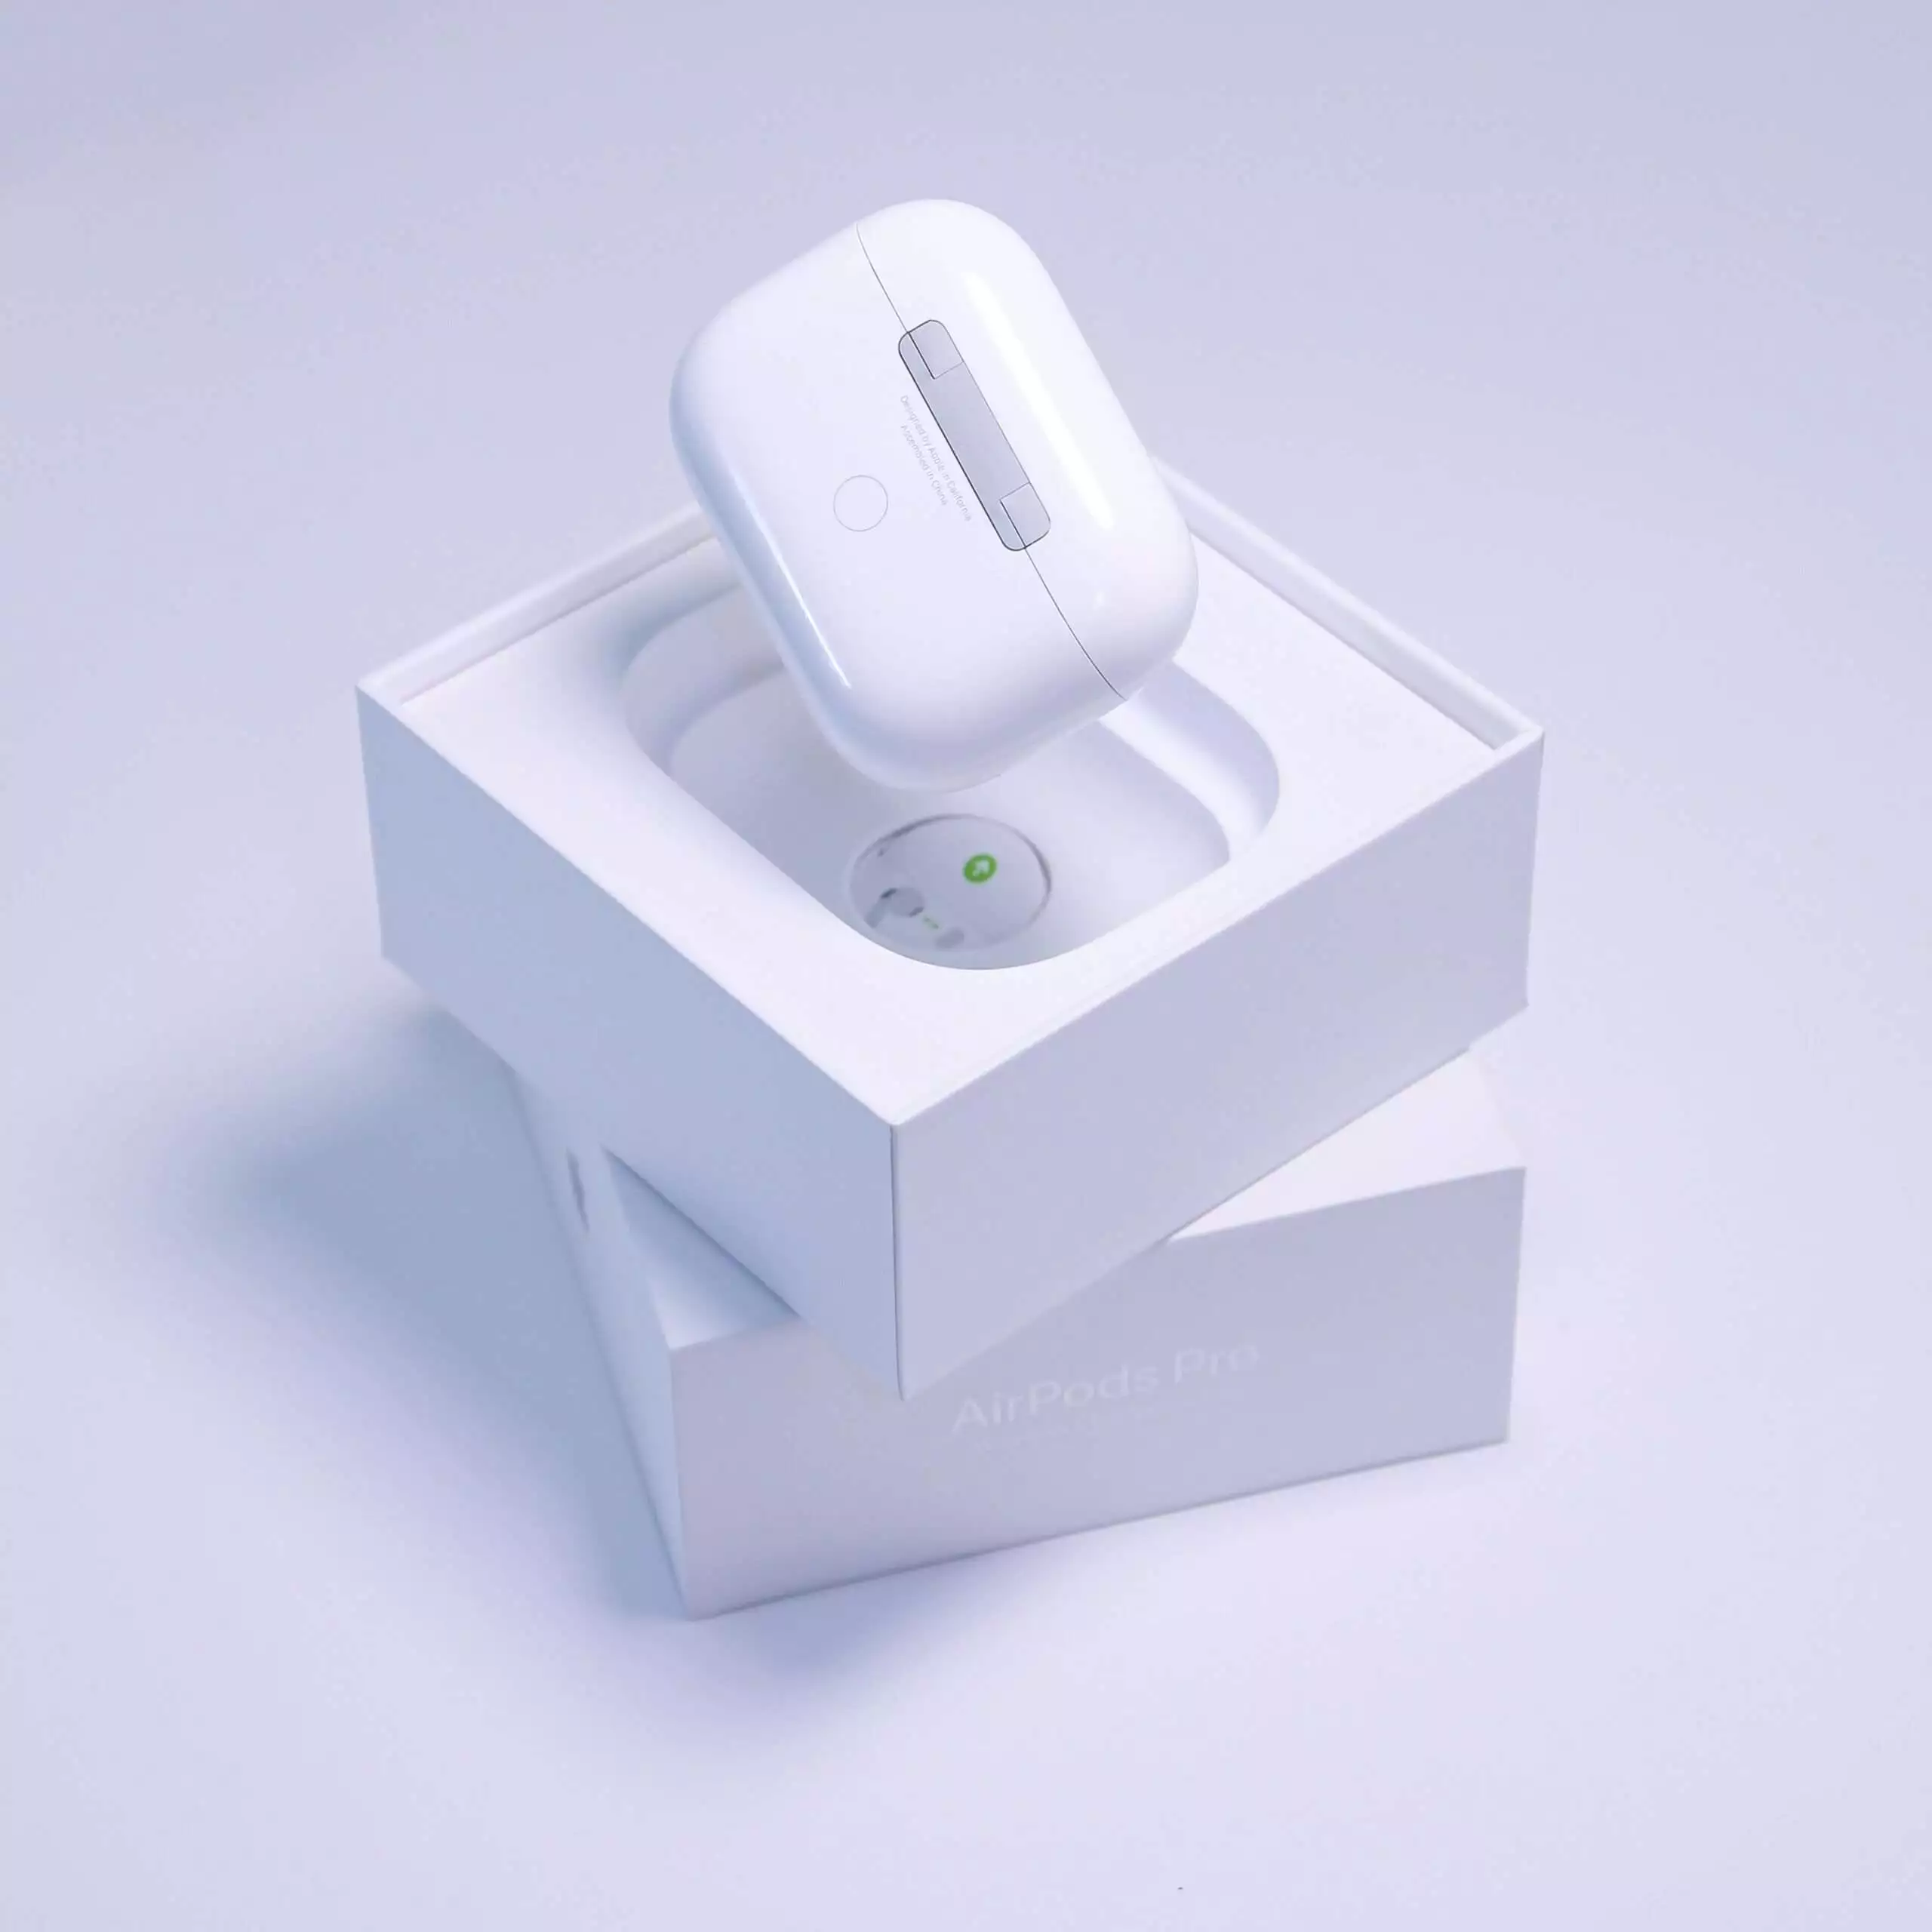 airpods pro review